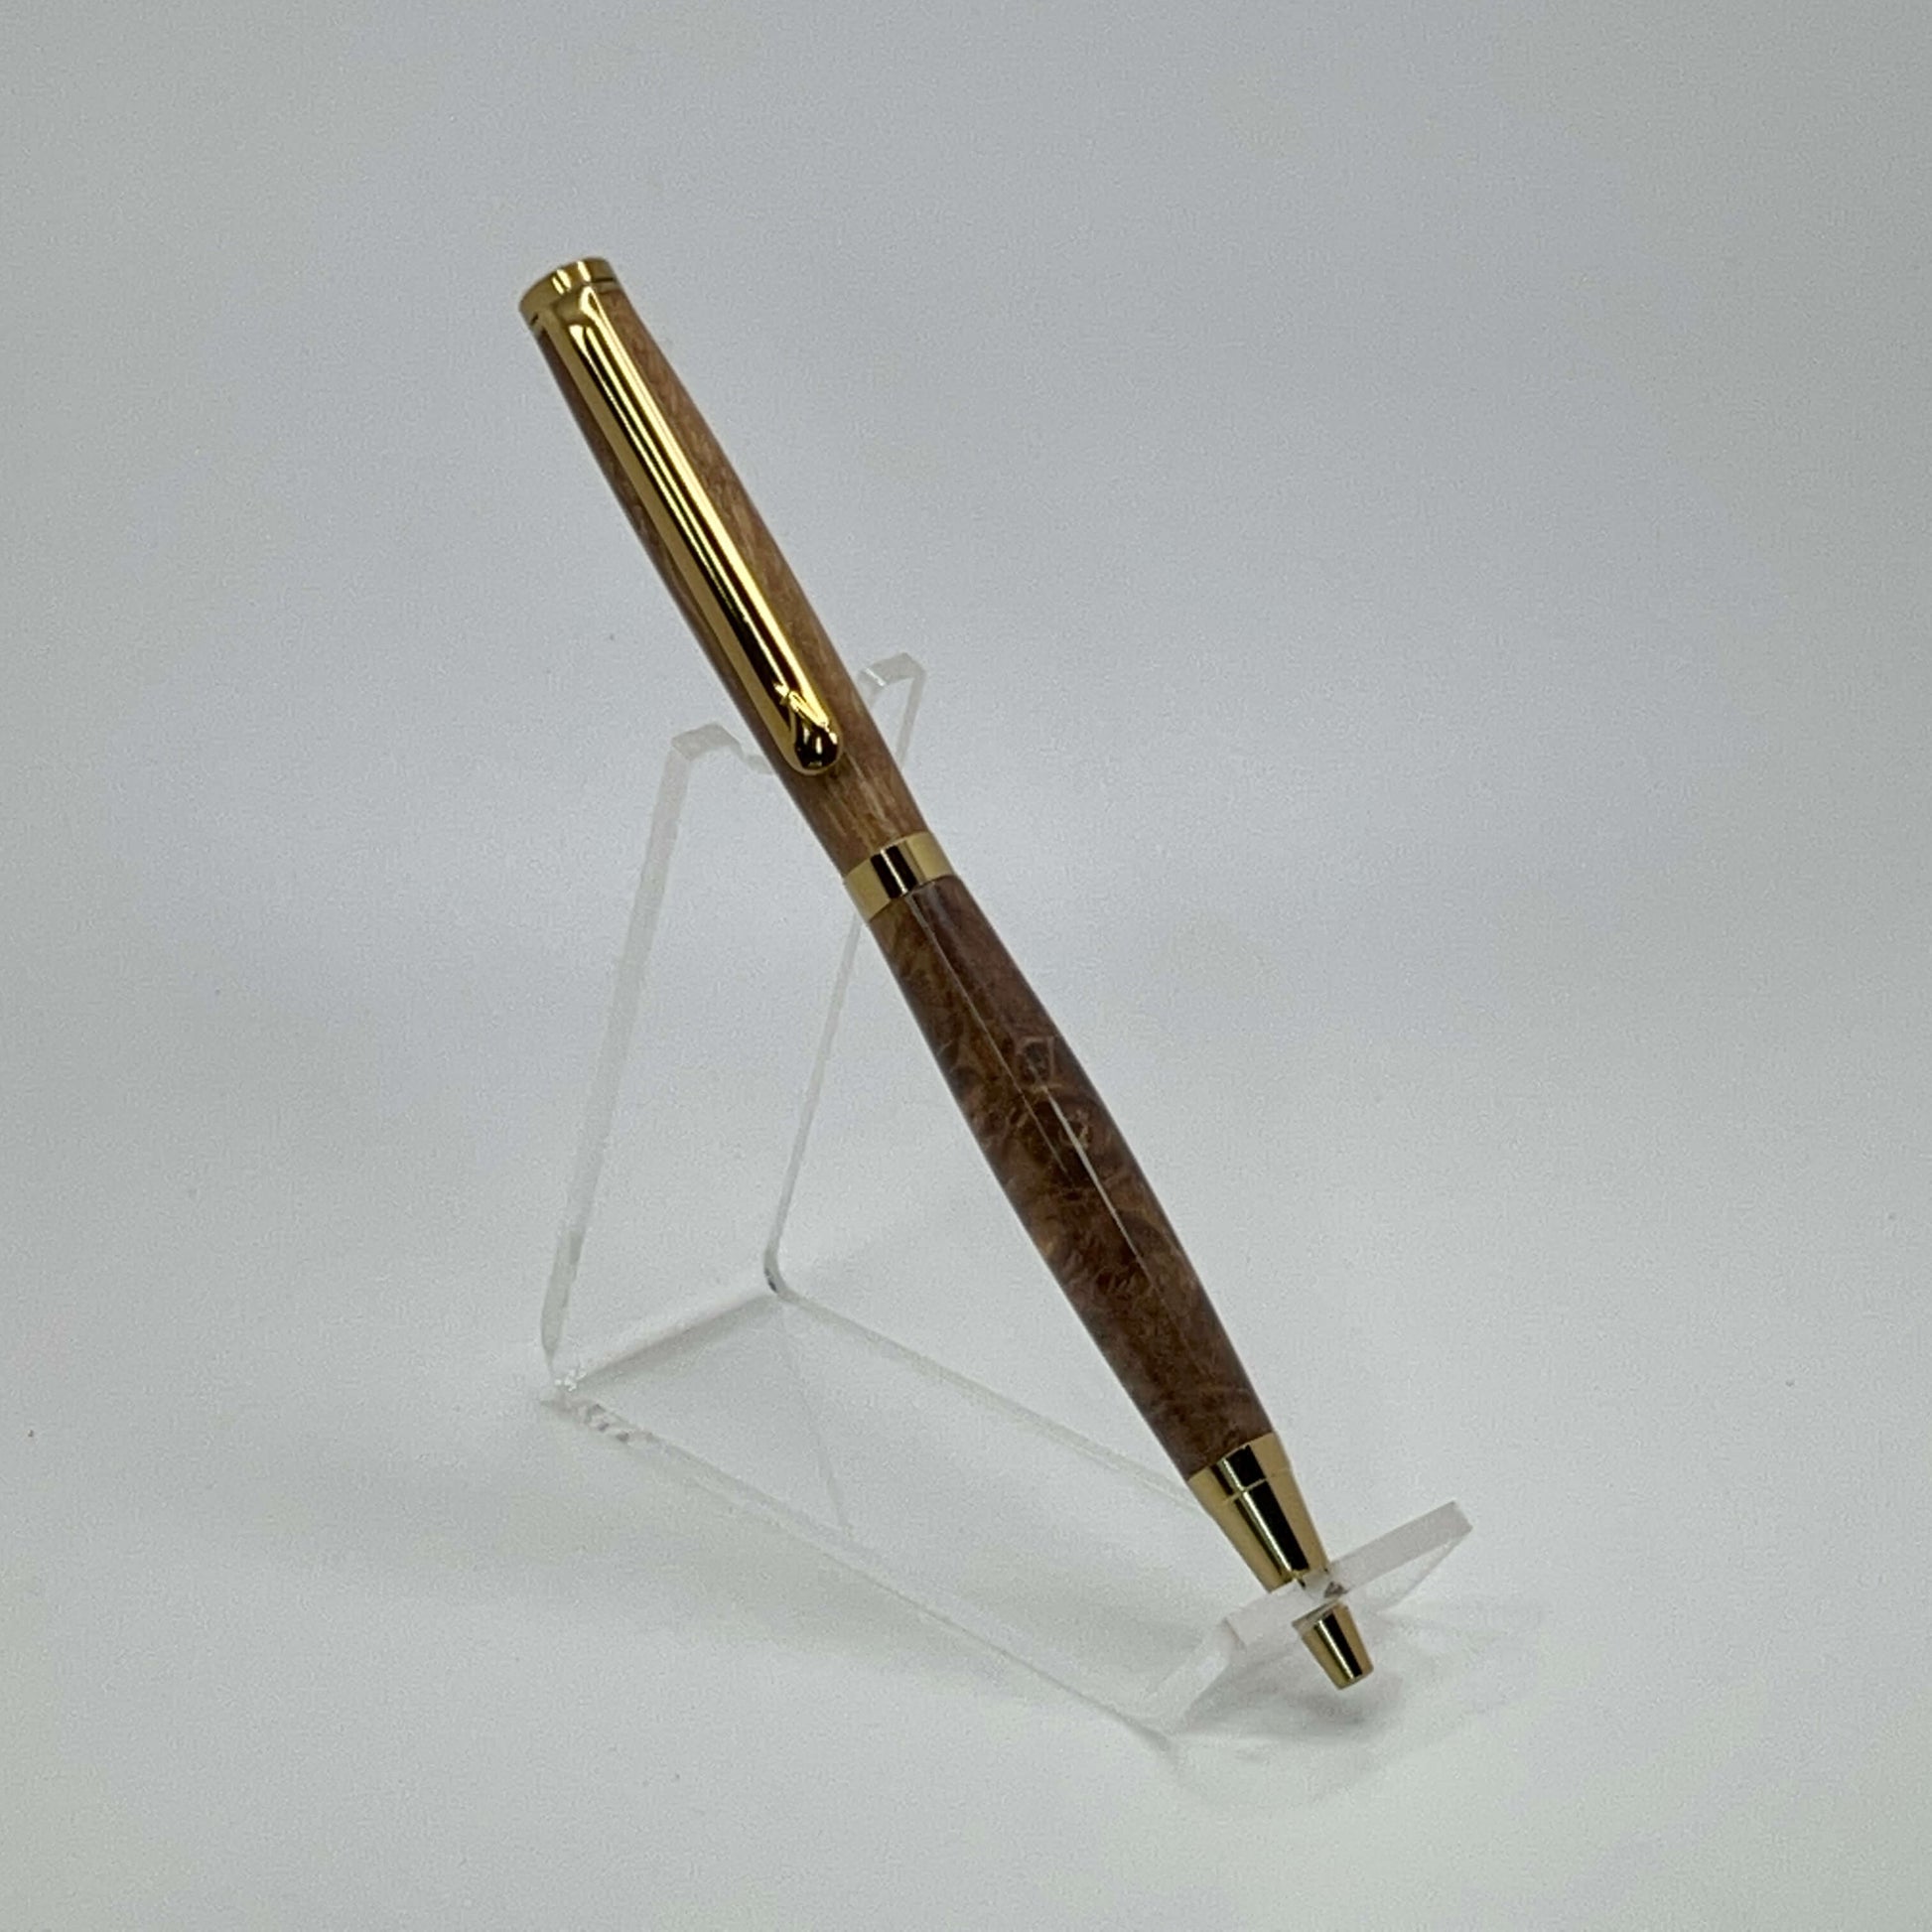 Right side view of handcrafted pen with Box Elder Burl wood dyed brown